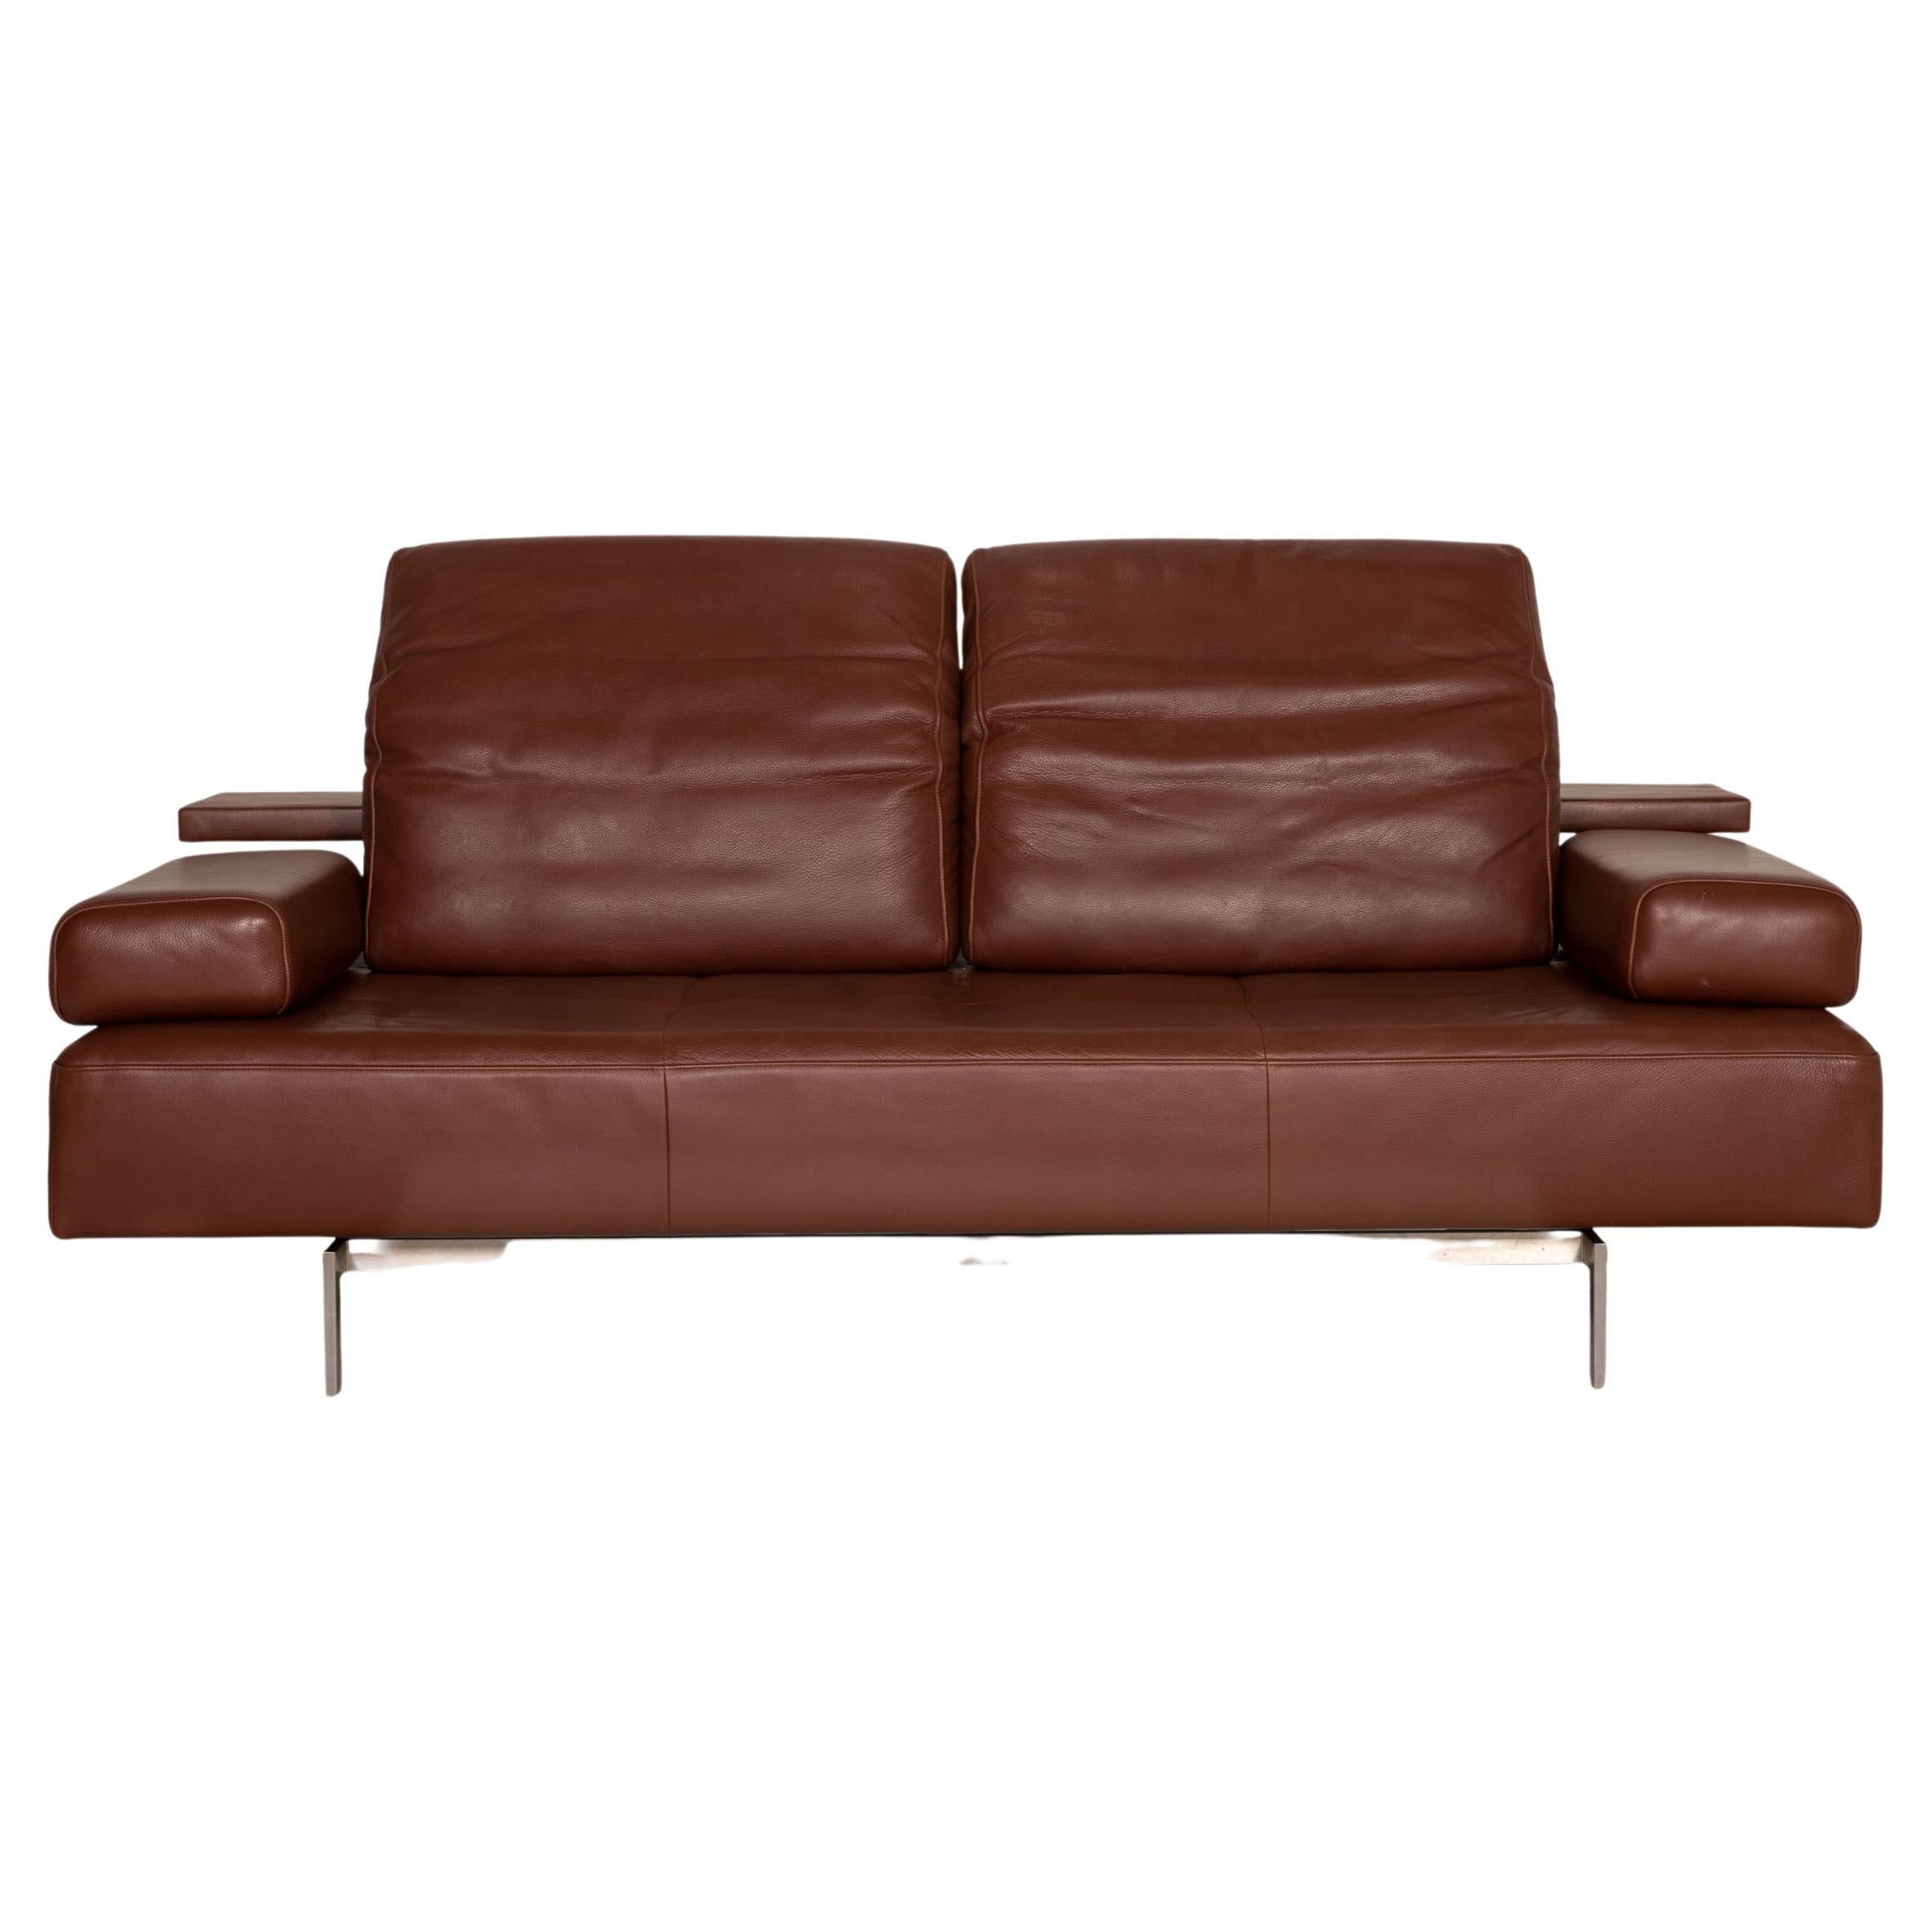 Rolf Benz Dono Leather Sofa Brown Three-Seater Couch Function For Sale